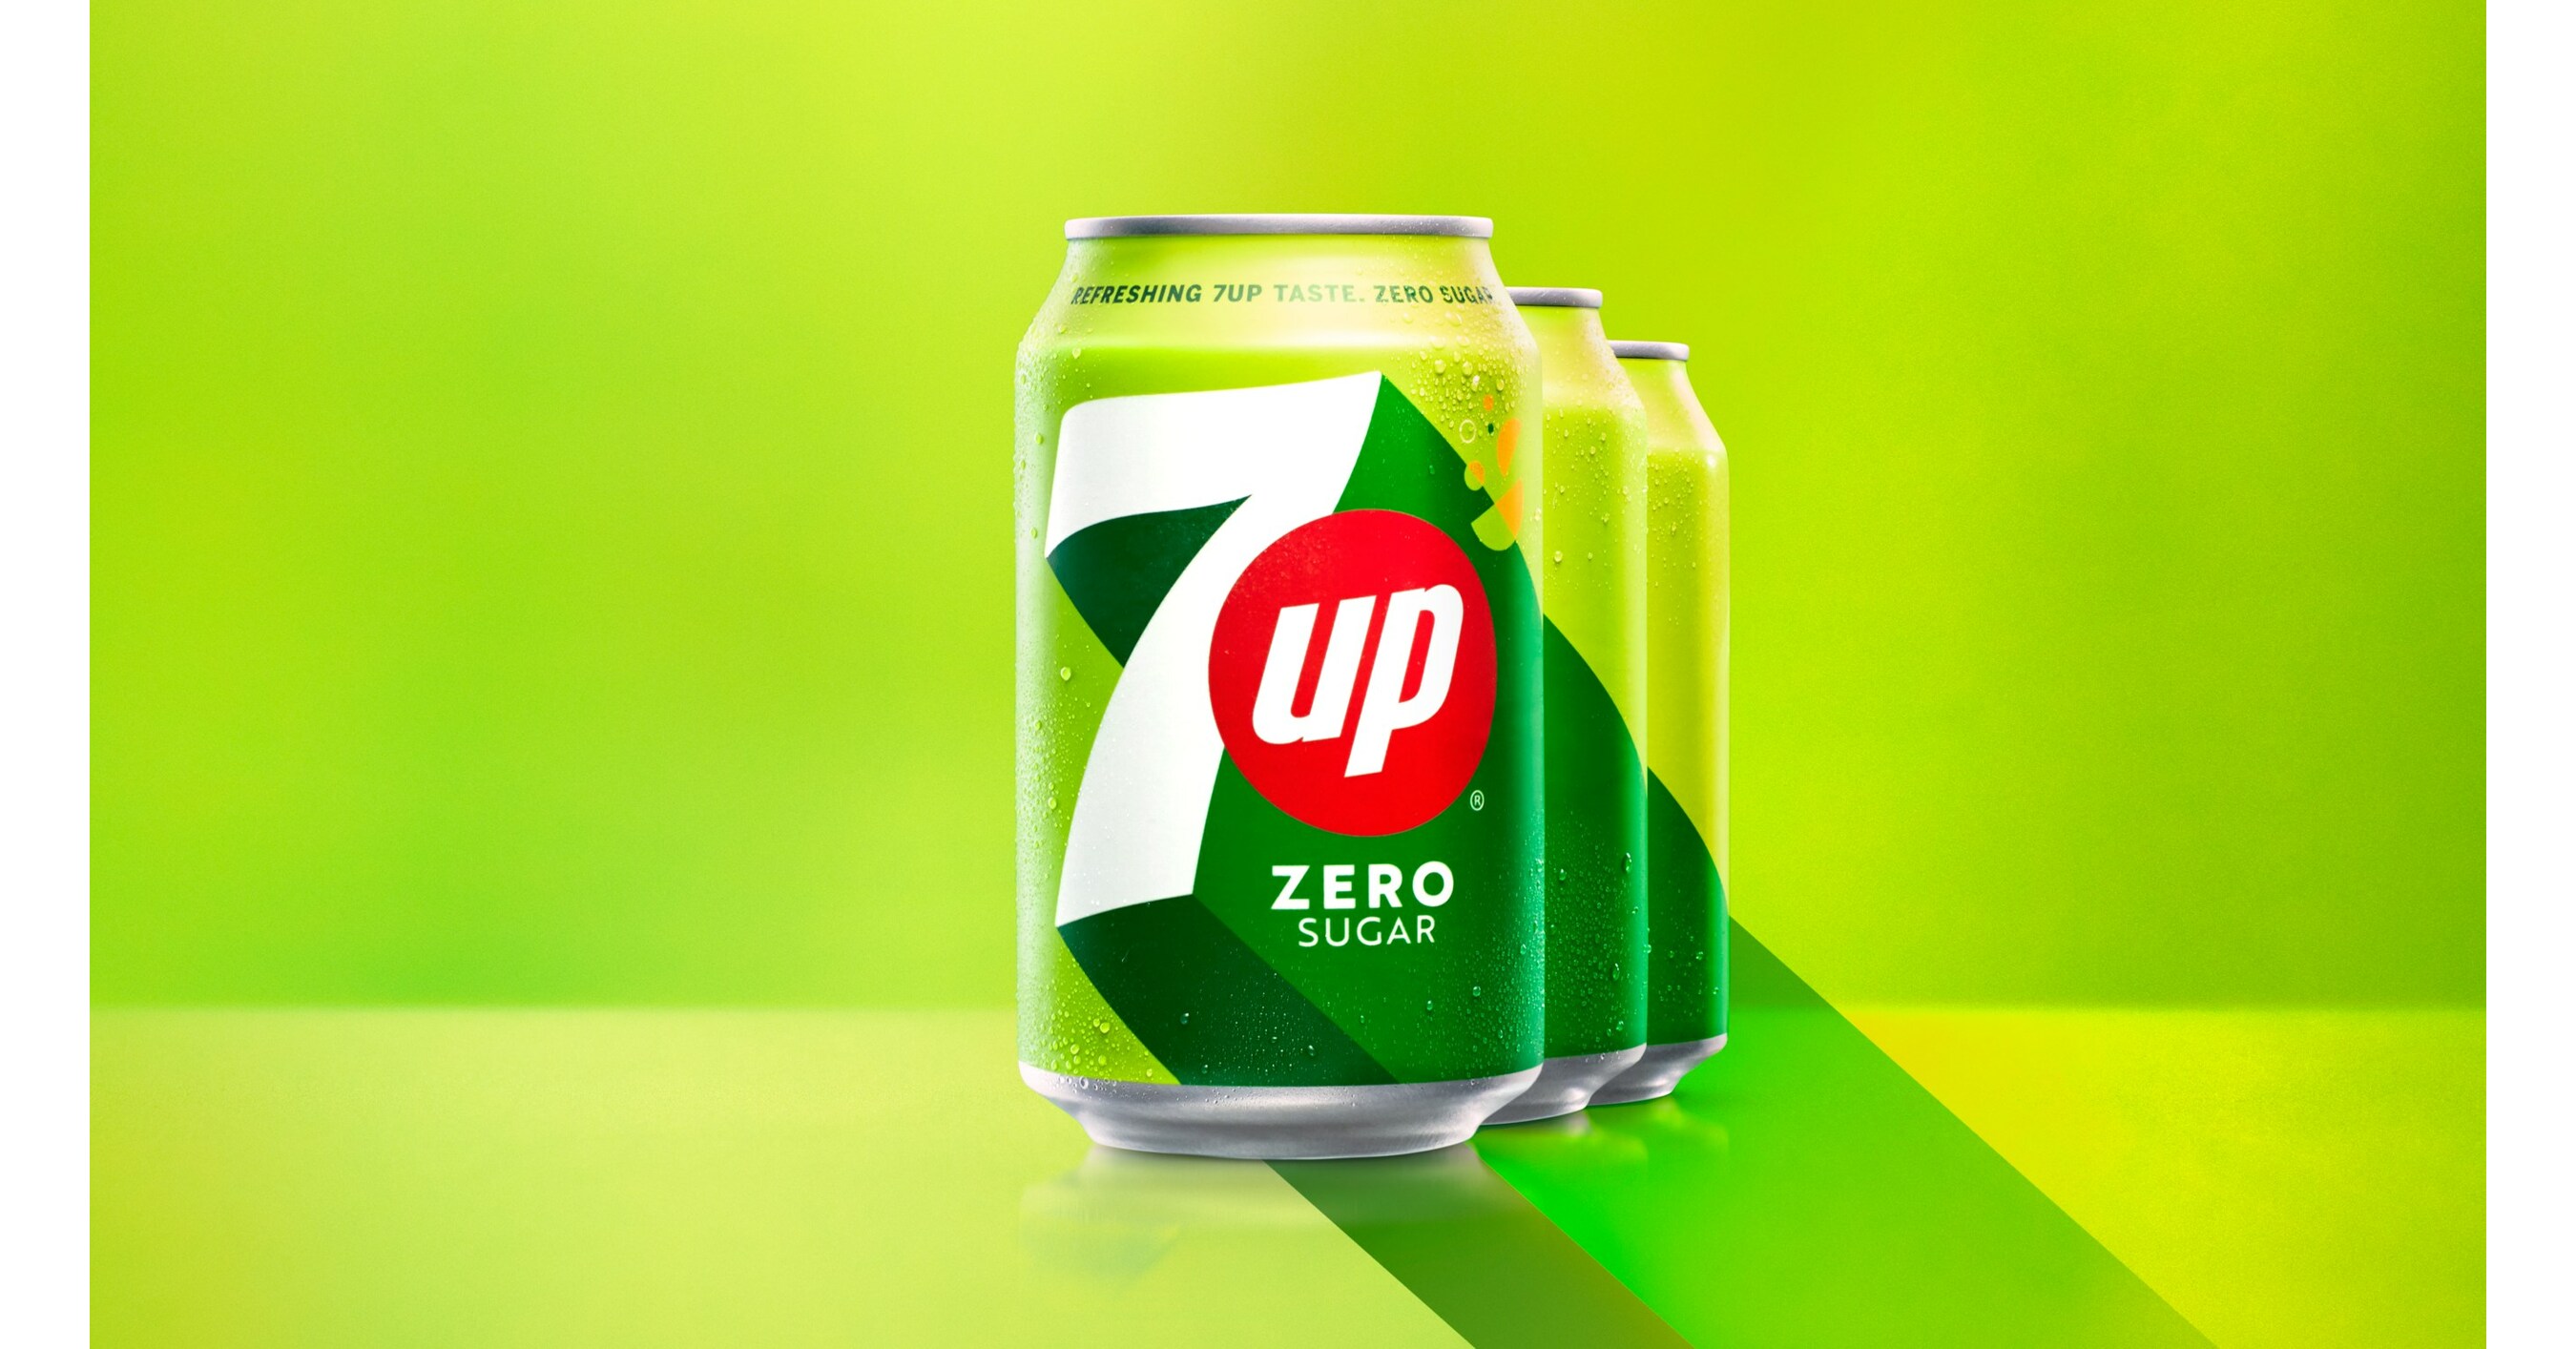 7up flavors